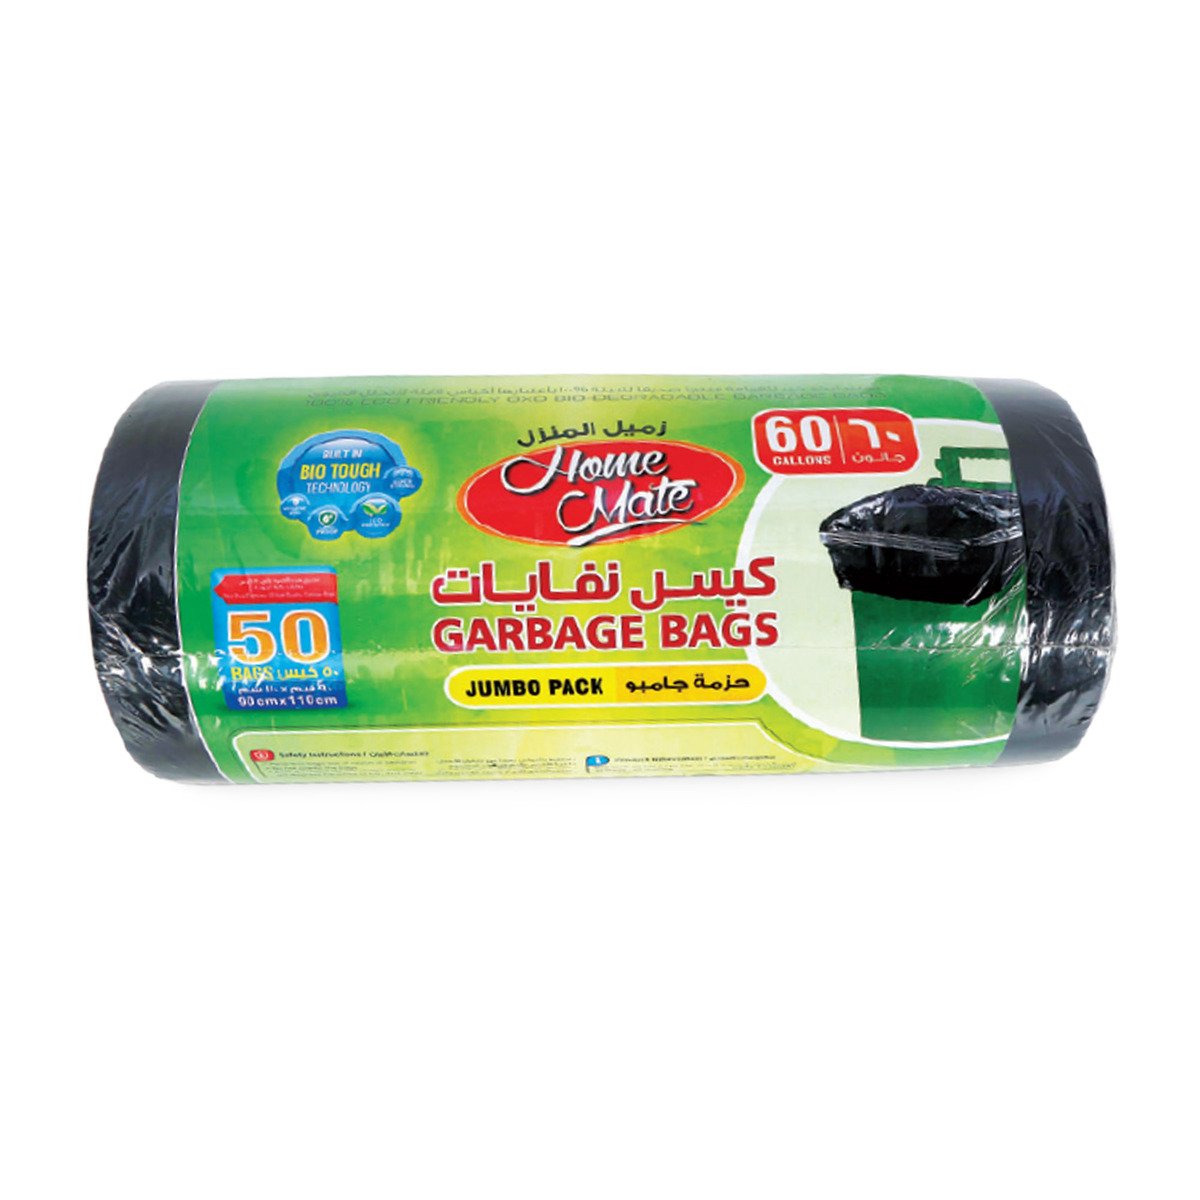 Home Mate Garbage Bags Jumbo Pack Size 90cm x 110cm 50pcs